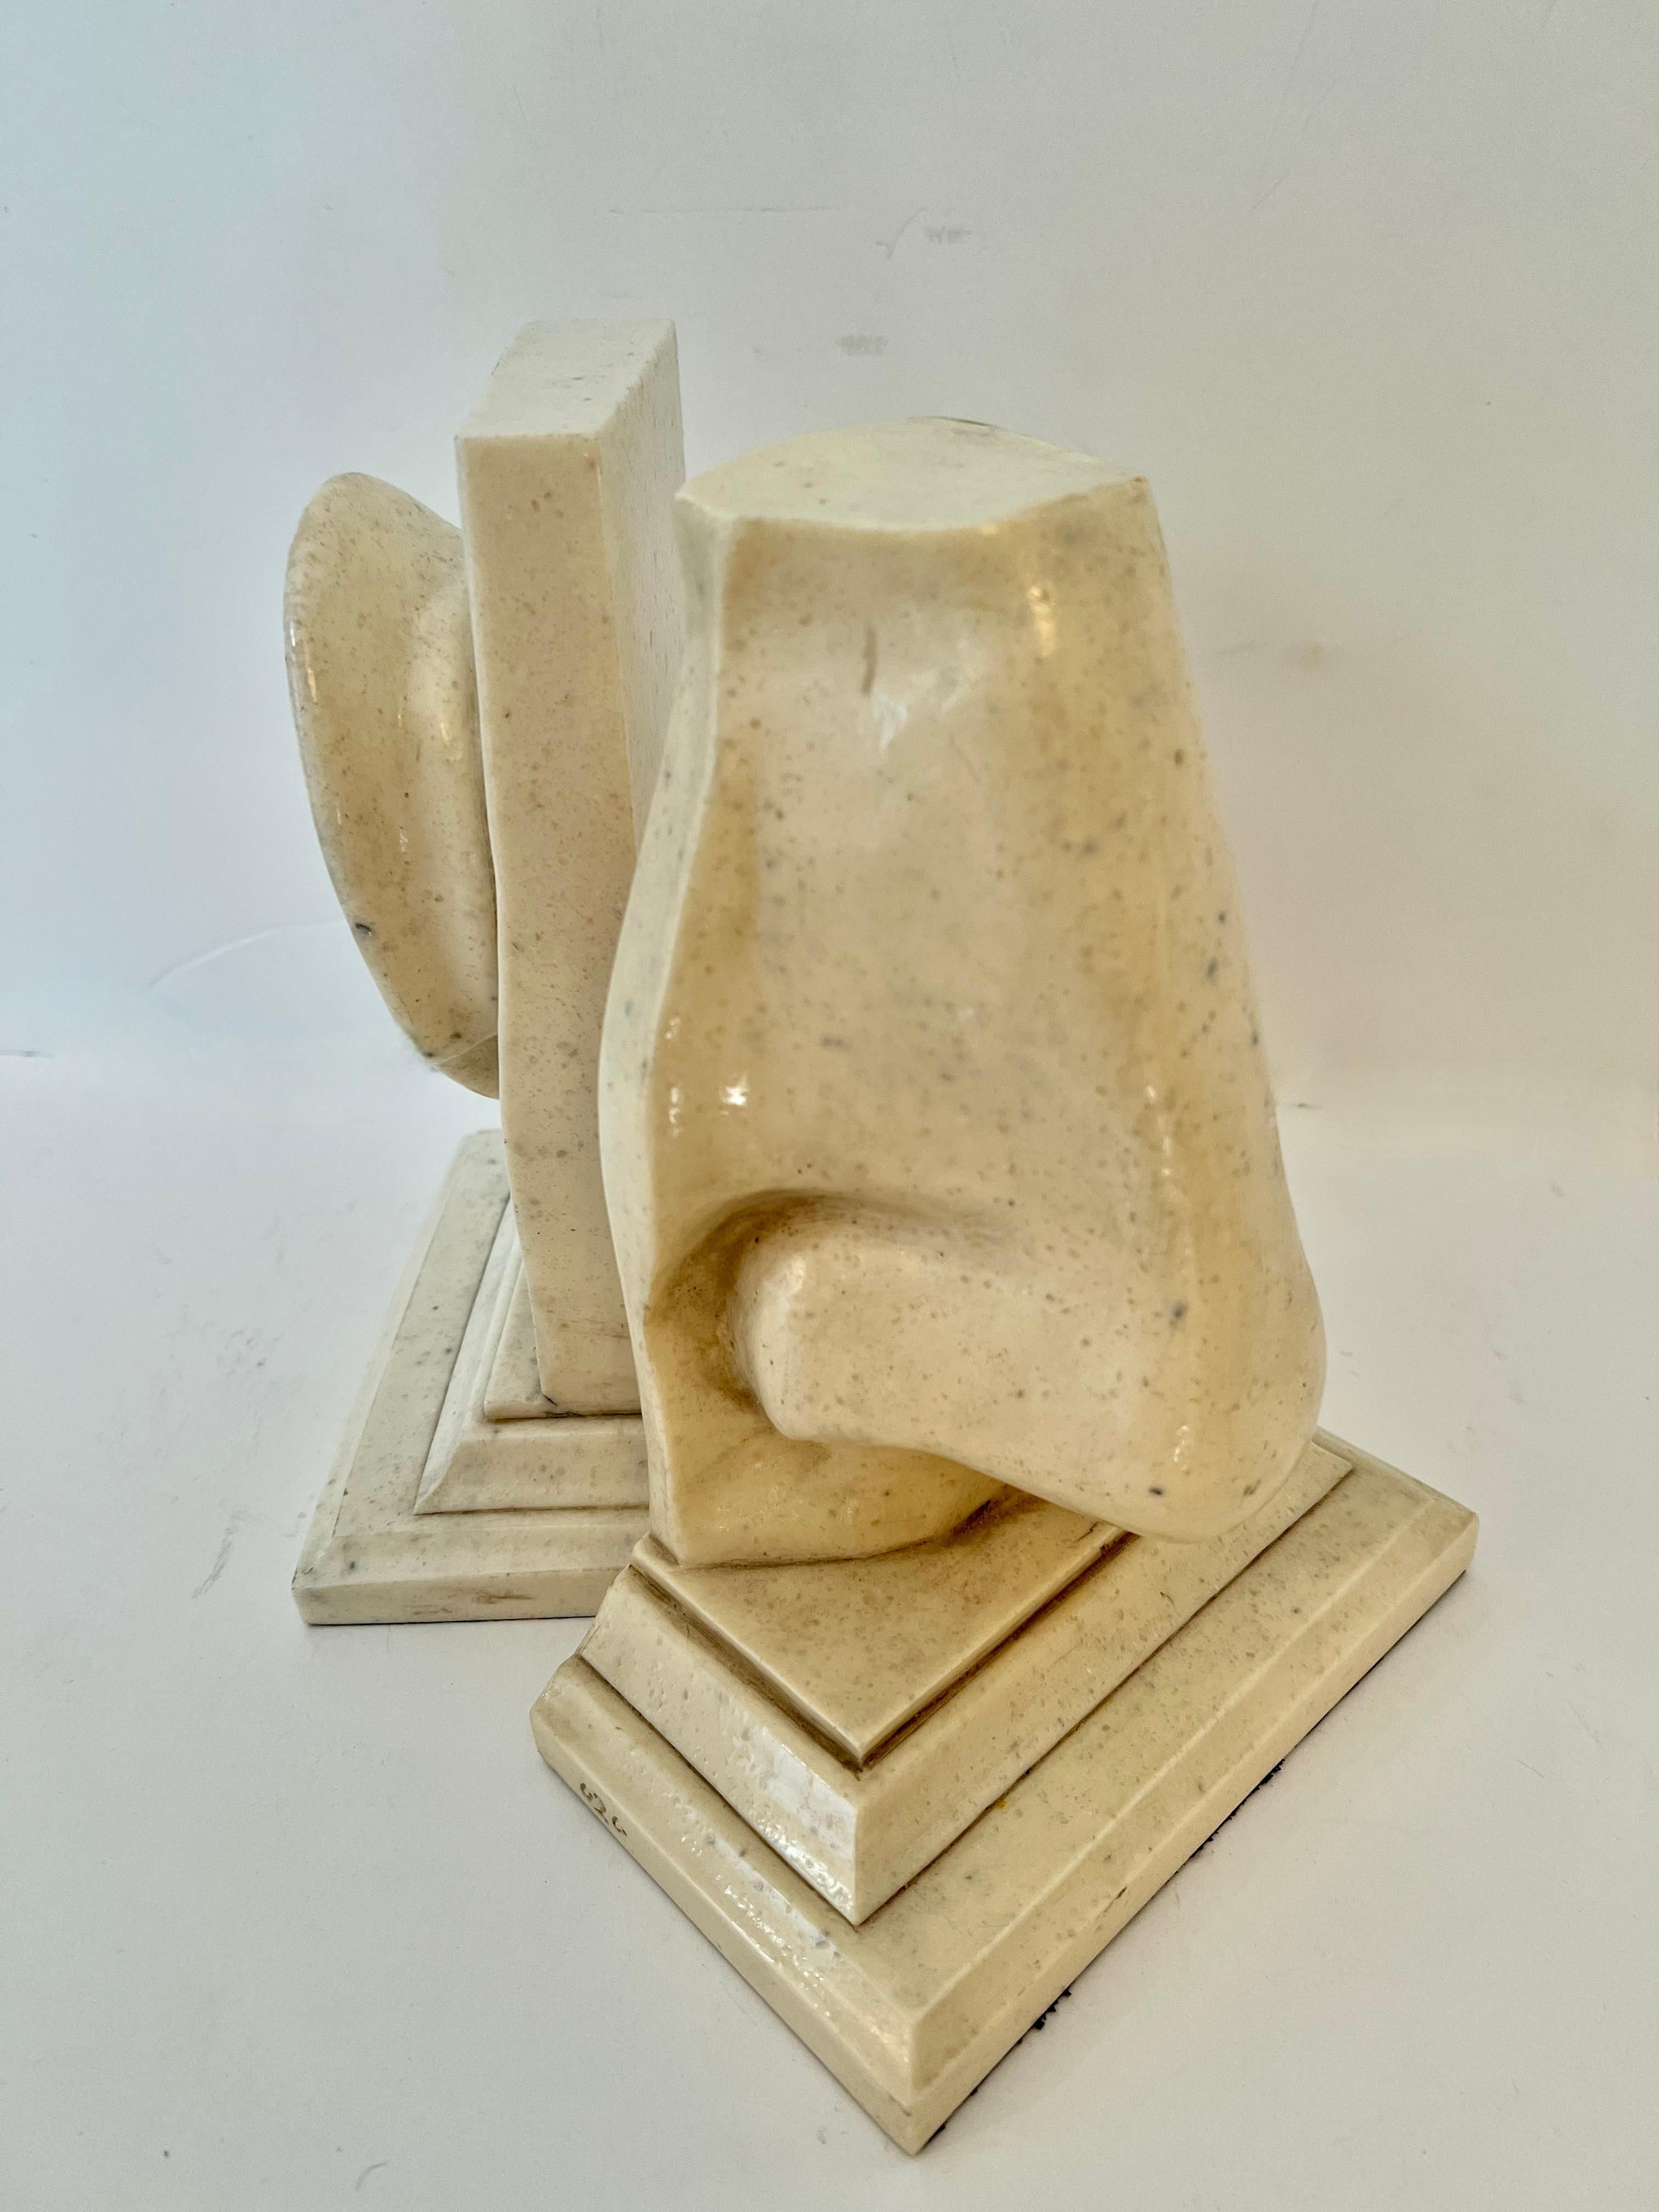 Pair of C2C Designs, a Resin Based Sculptural Ear and Nose Bookend Set For Sale 4